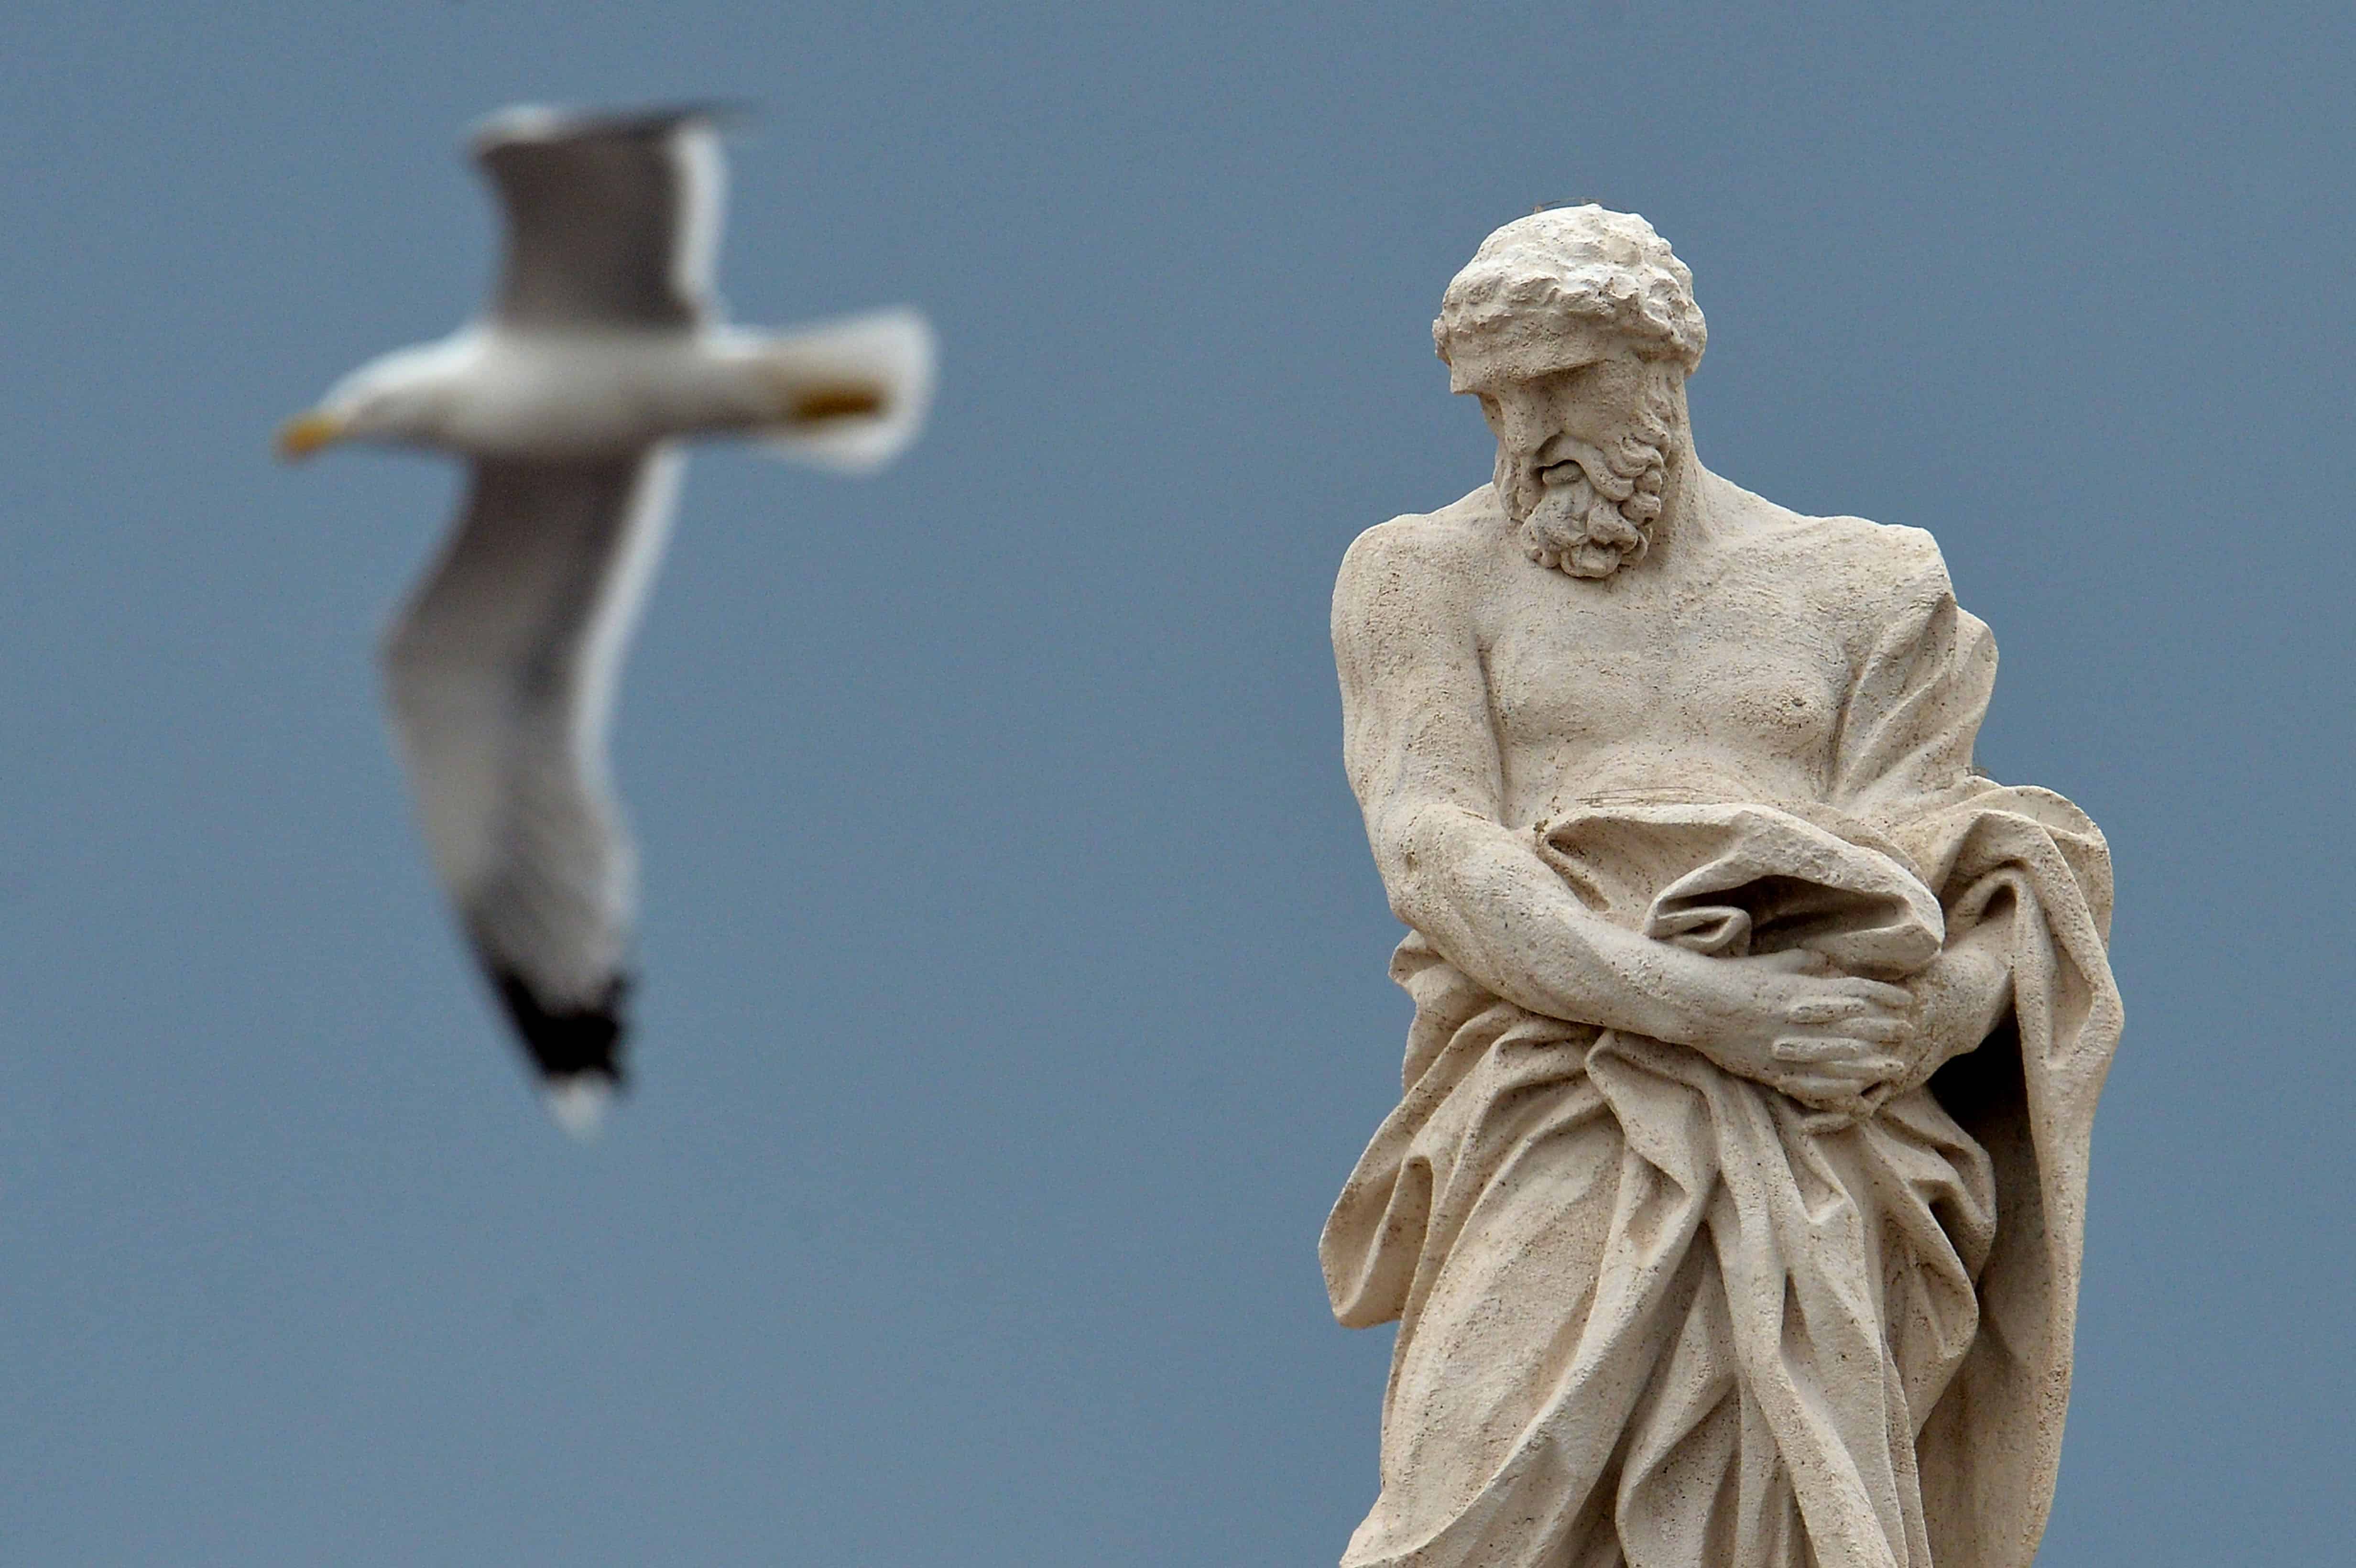 A seagull flies past a statue at St. Peter's Square.